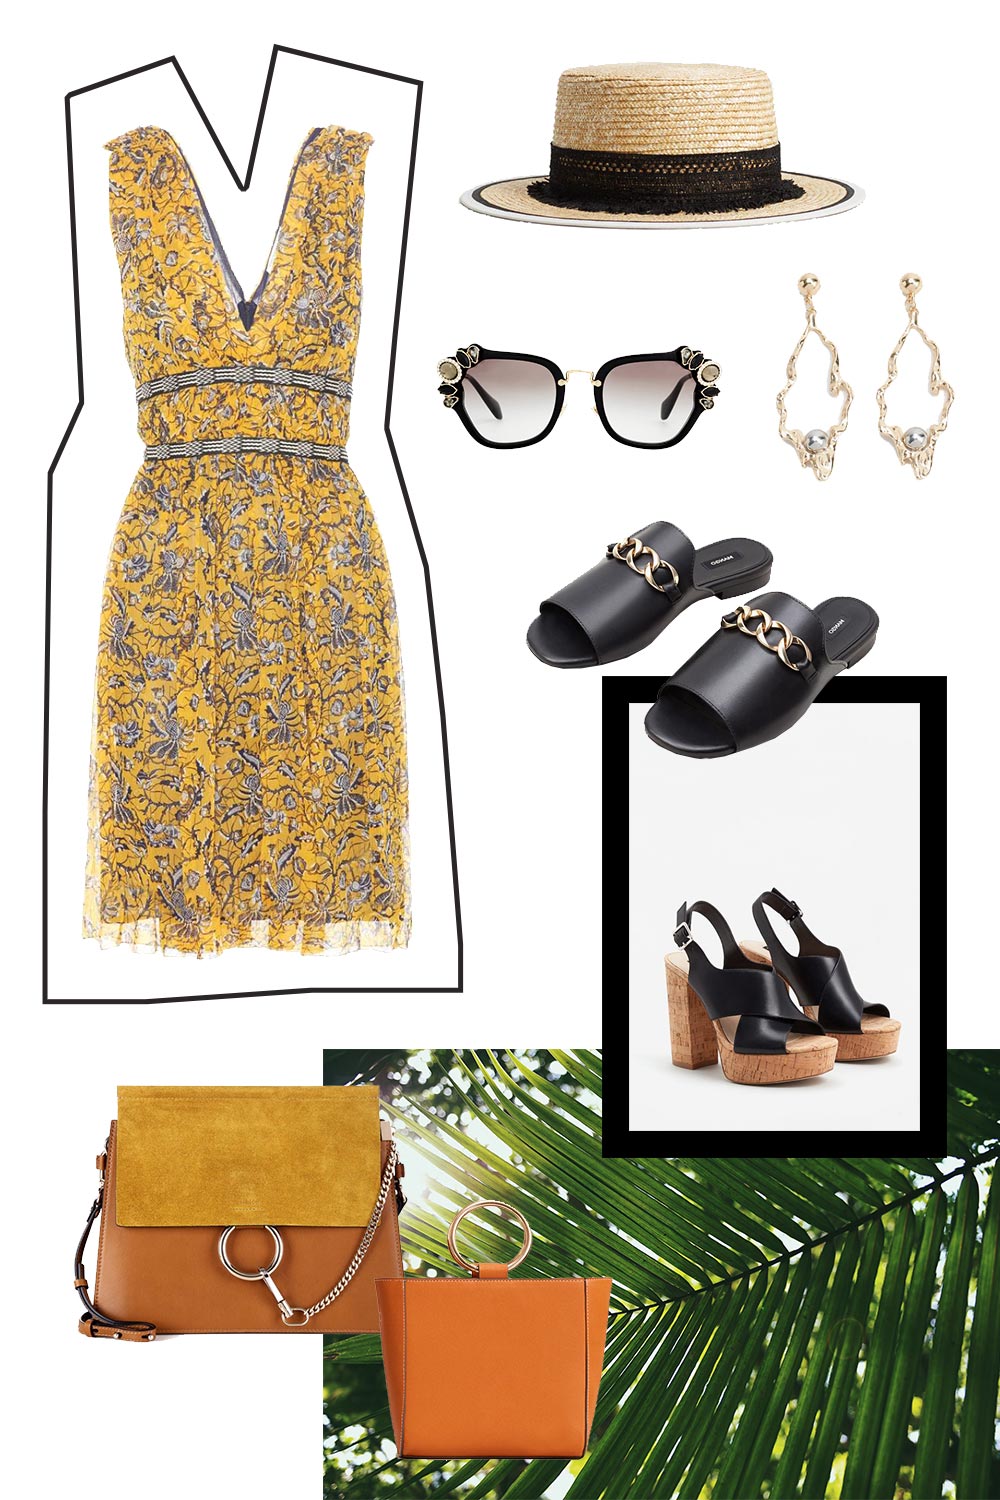 Sommer Outfit Cravings, Outfit Idee, Isabel Marant Print Kleid, Plateau Schuhe, Miu Miu Sonnenbrille, Chloe Faye Tasche, Mango Schuhe, Urlaubsoutfit, Fashion Blog, Modeblog, Style Blog, www.whoismocca.com